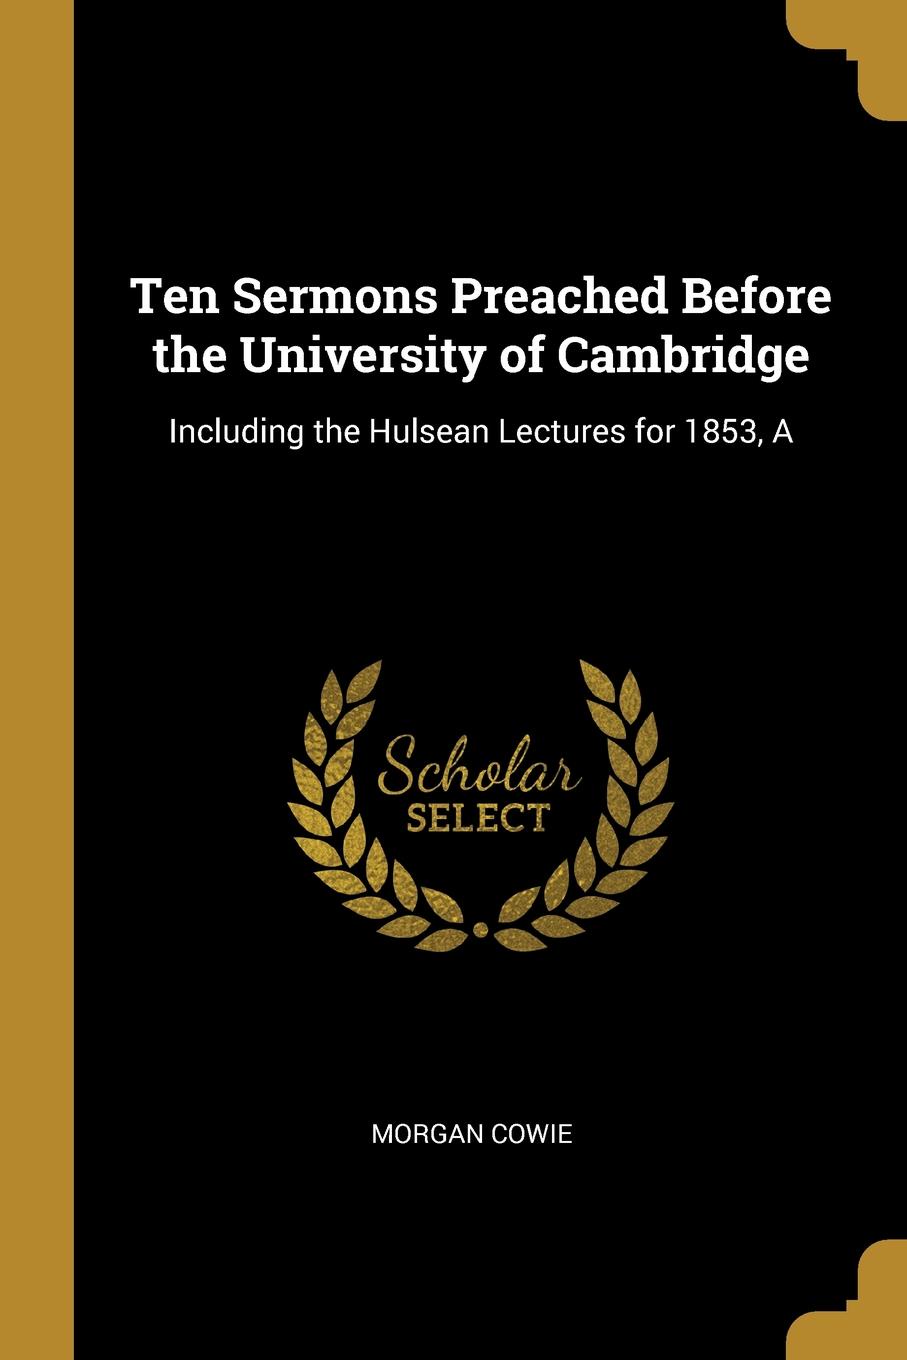 Ten Sermons Preached Before the University of Cambridge. Including the Hulsean Lectures for 1853, A